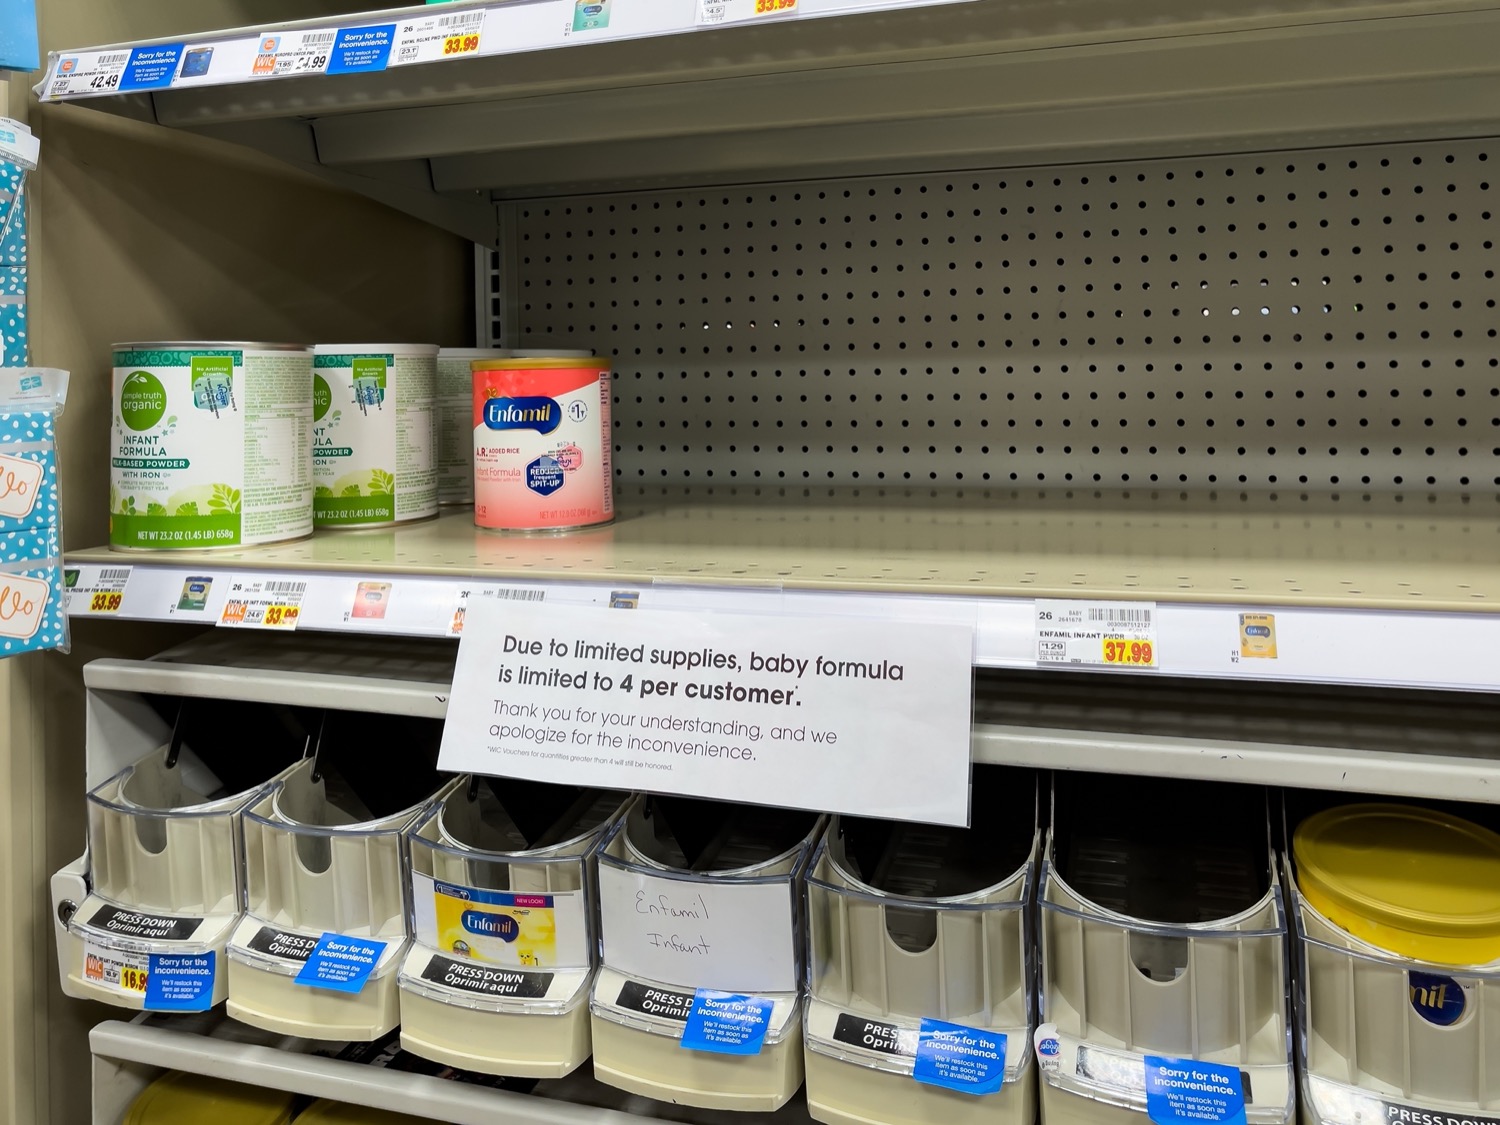 a nearly empty store shelf, on the left are only a few cans of baby formula. a small sign below the shelf reads 'due to limited supplies, baby formula is limited to 4 a customer. thank you for understanding and we apologize for the inconvenience."